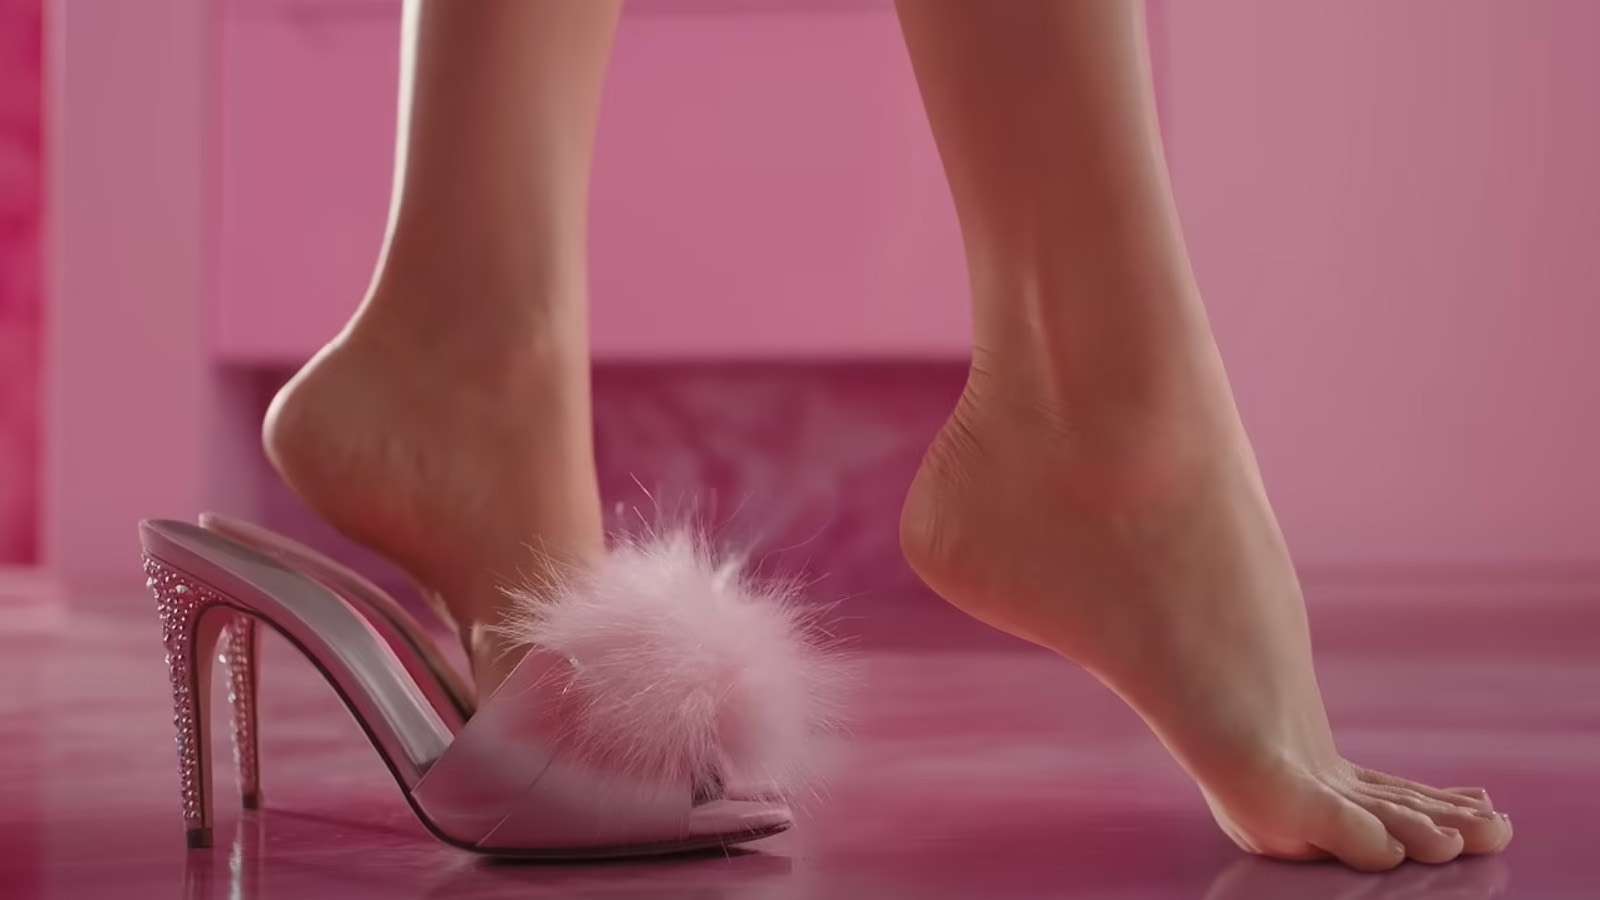 Margot Robbie responds to Barbie fans obsessing over her feet